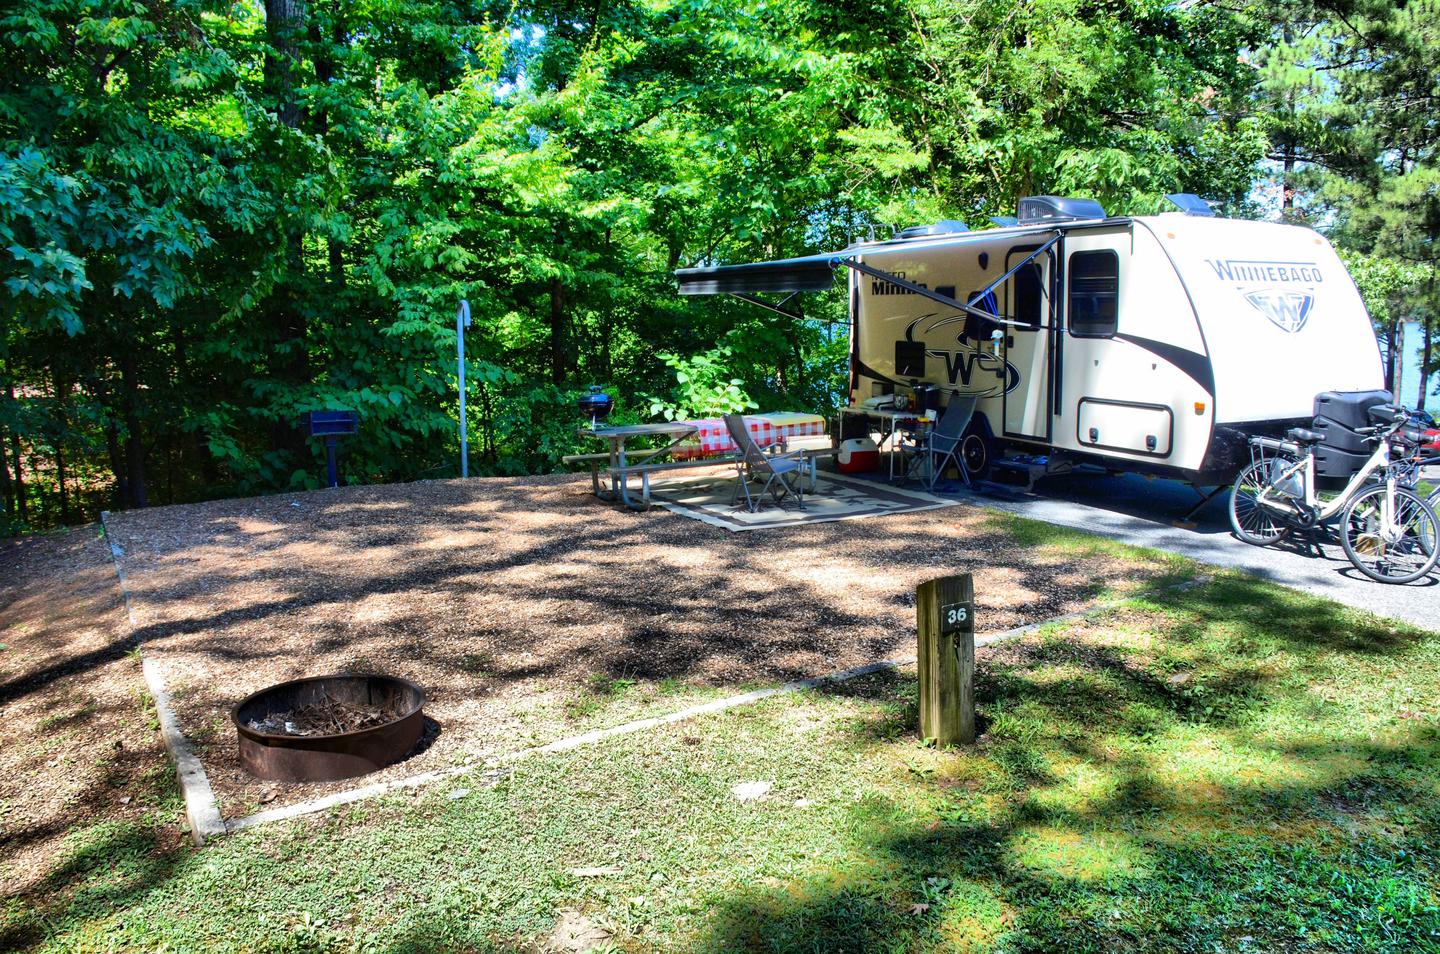 Campsite view, awning-side clearanceOld 41 #3, campsite 036.